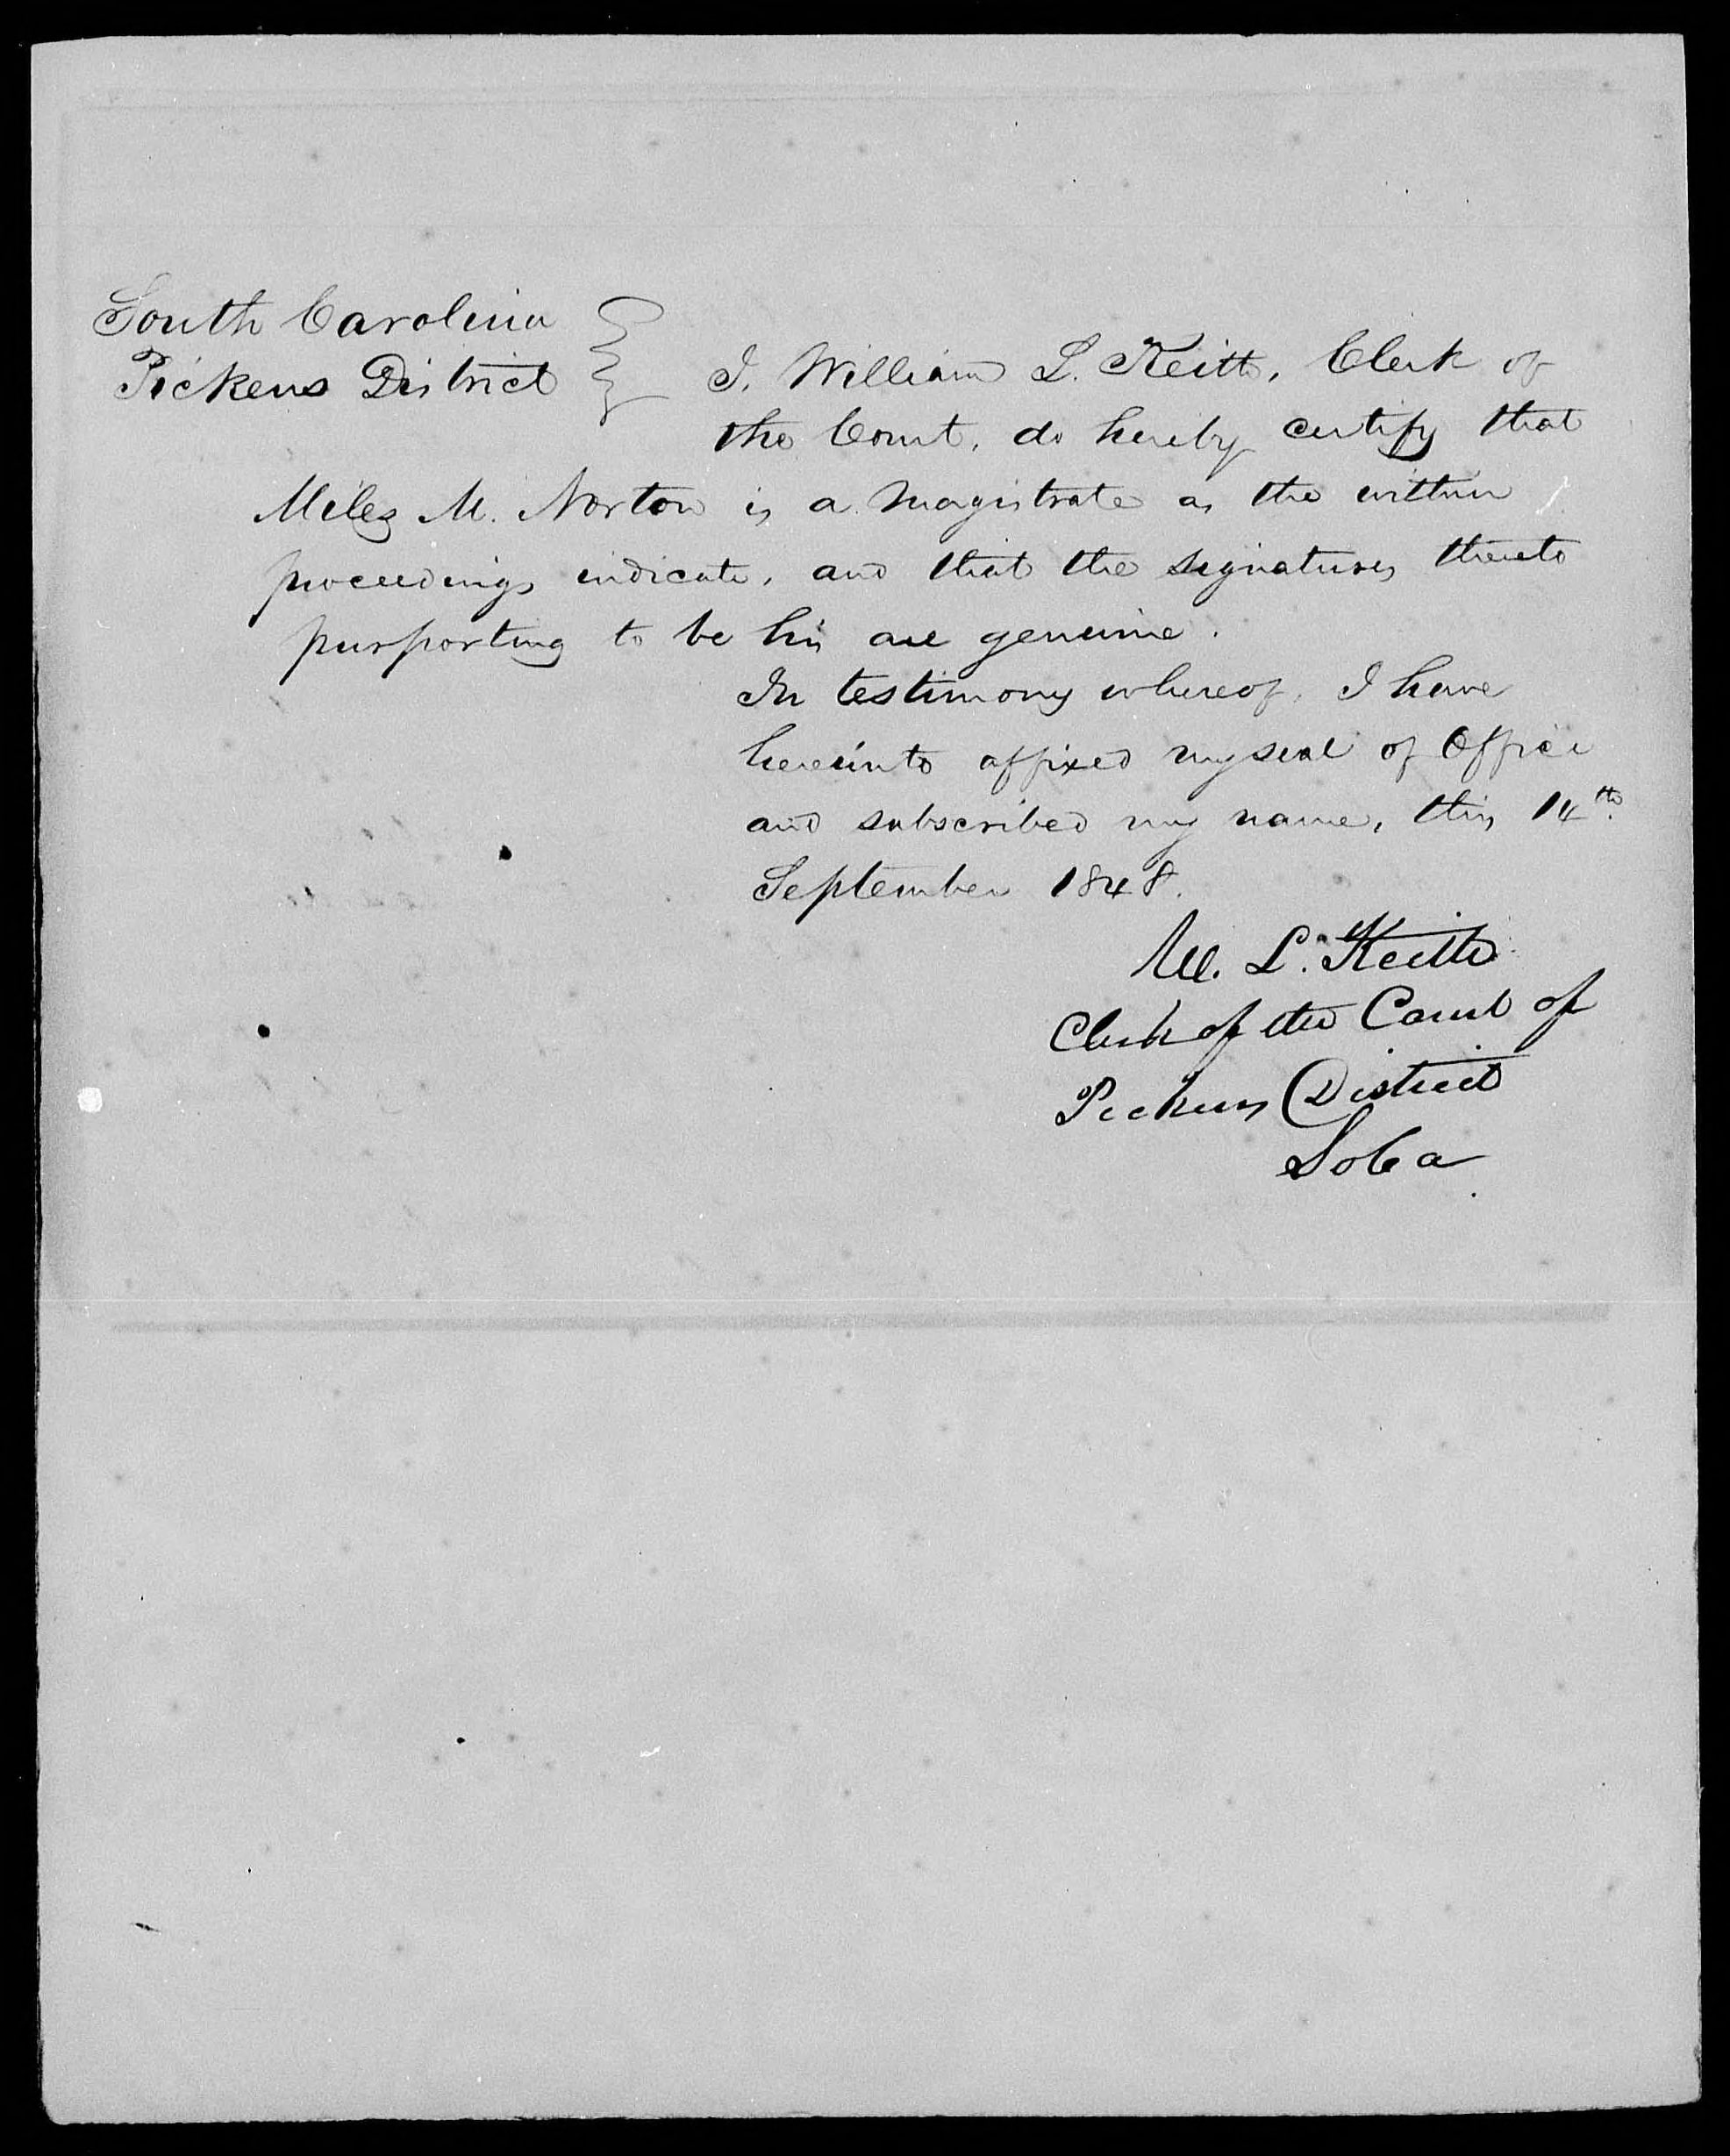 Application for a Widow's Pension from Anna Guest, 14 September 1848, page 2